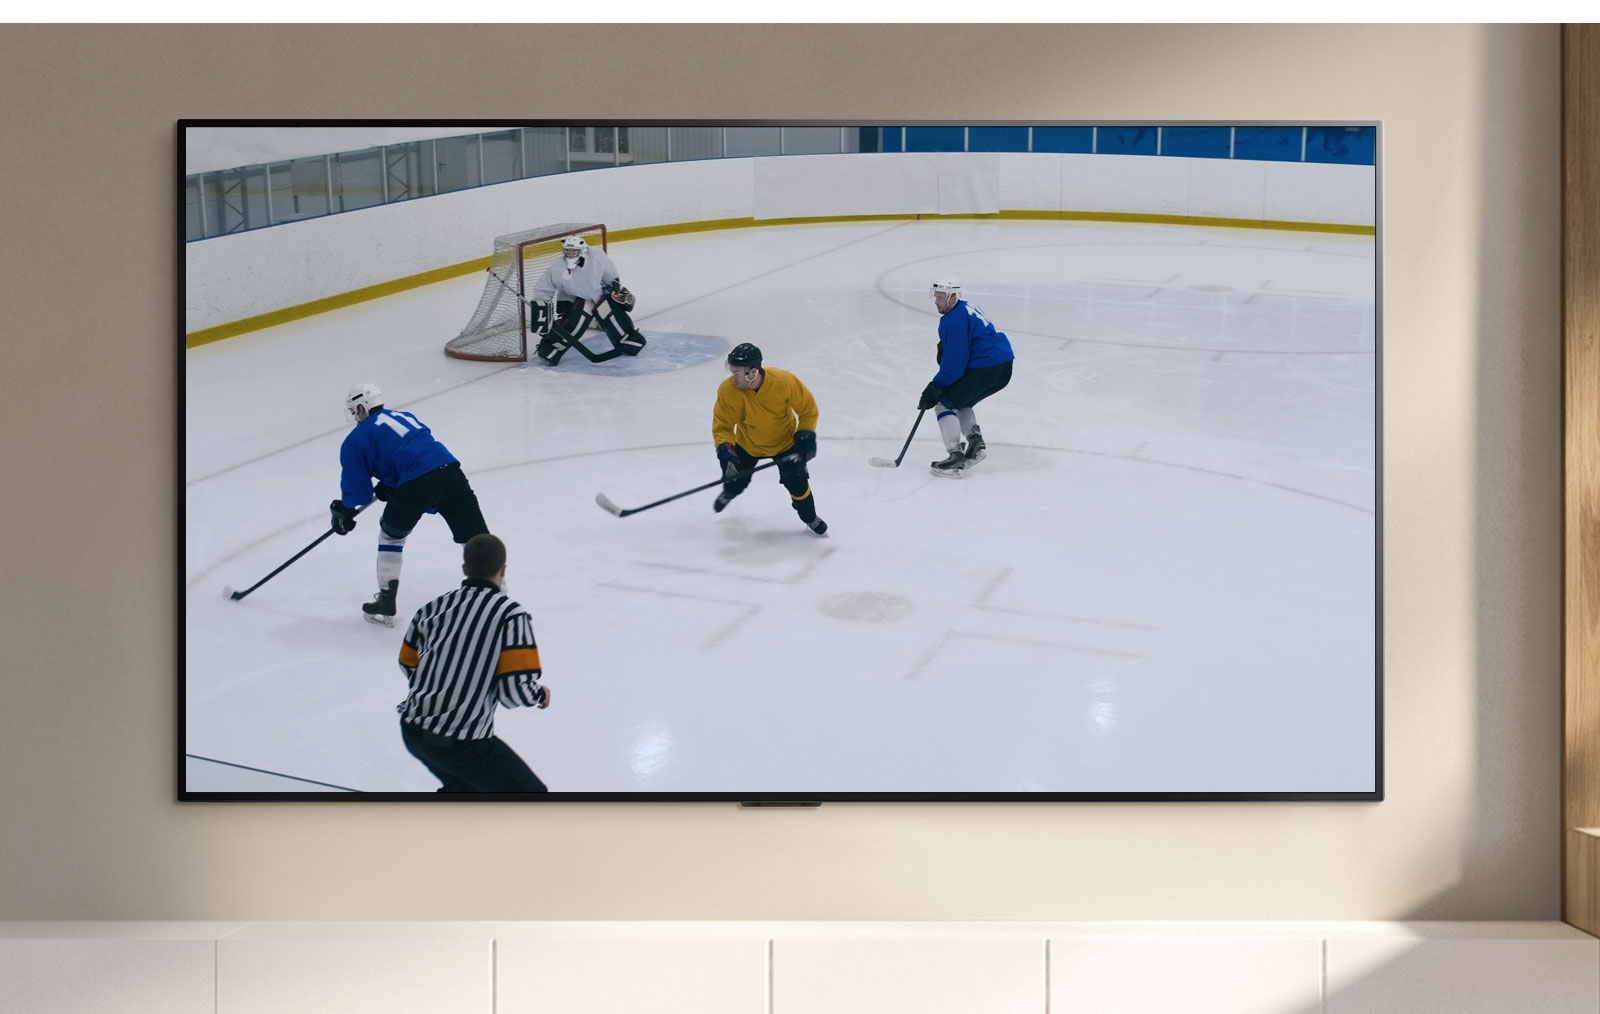 A TV screen showing hockey players playing hockey(play the video)